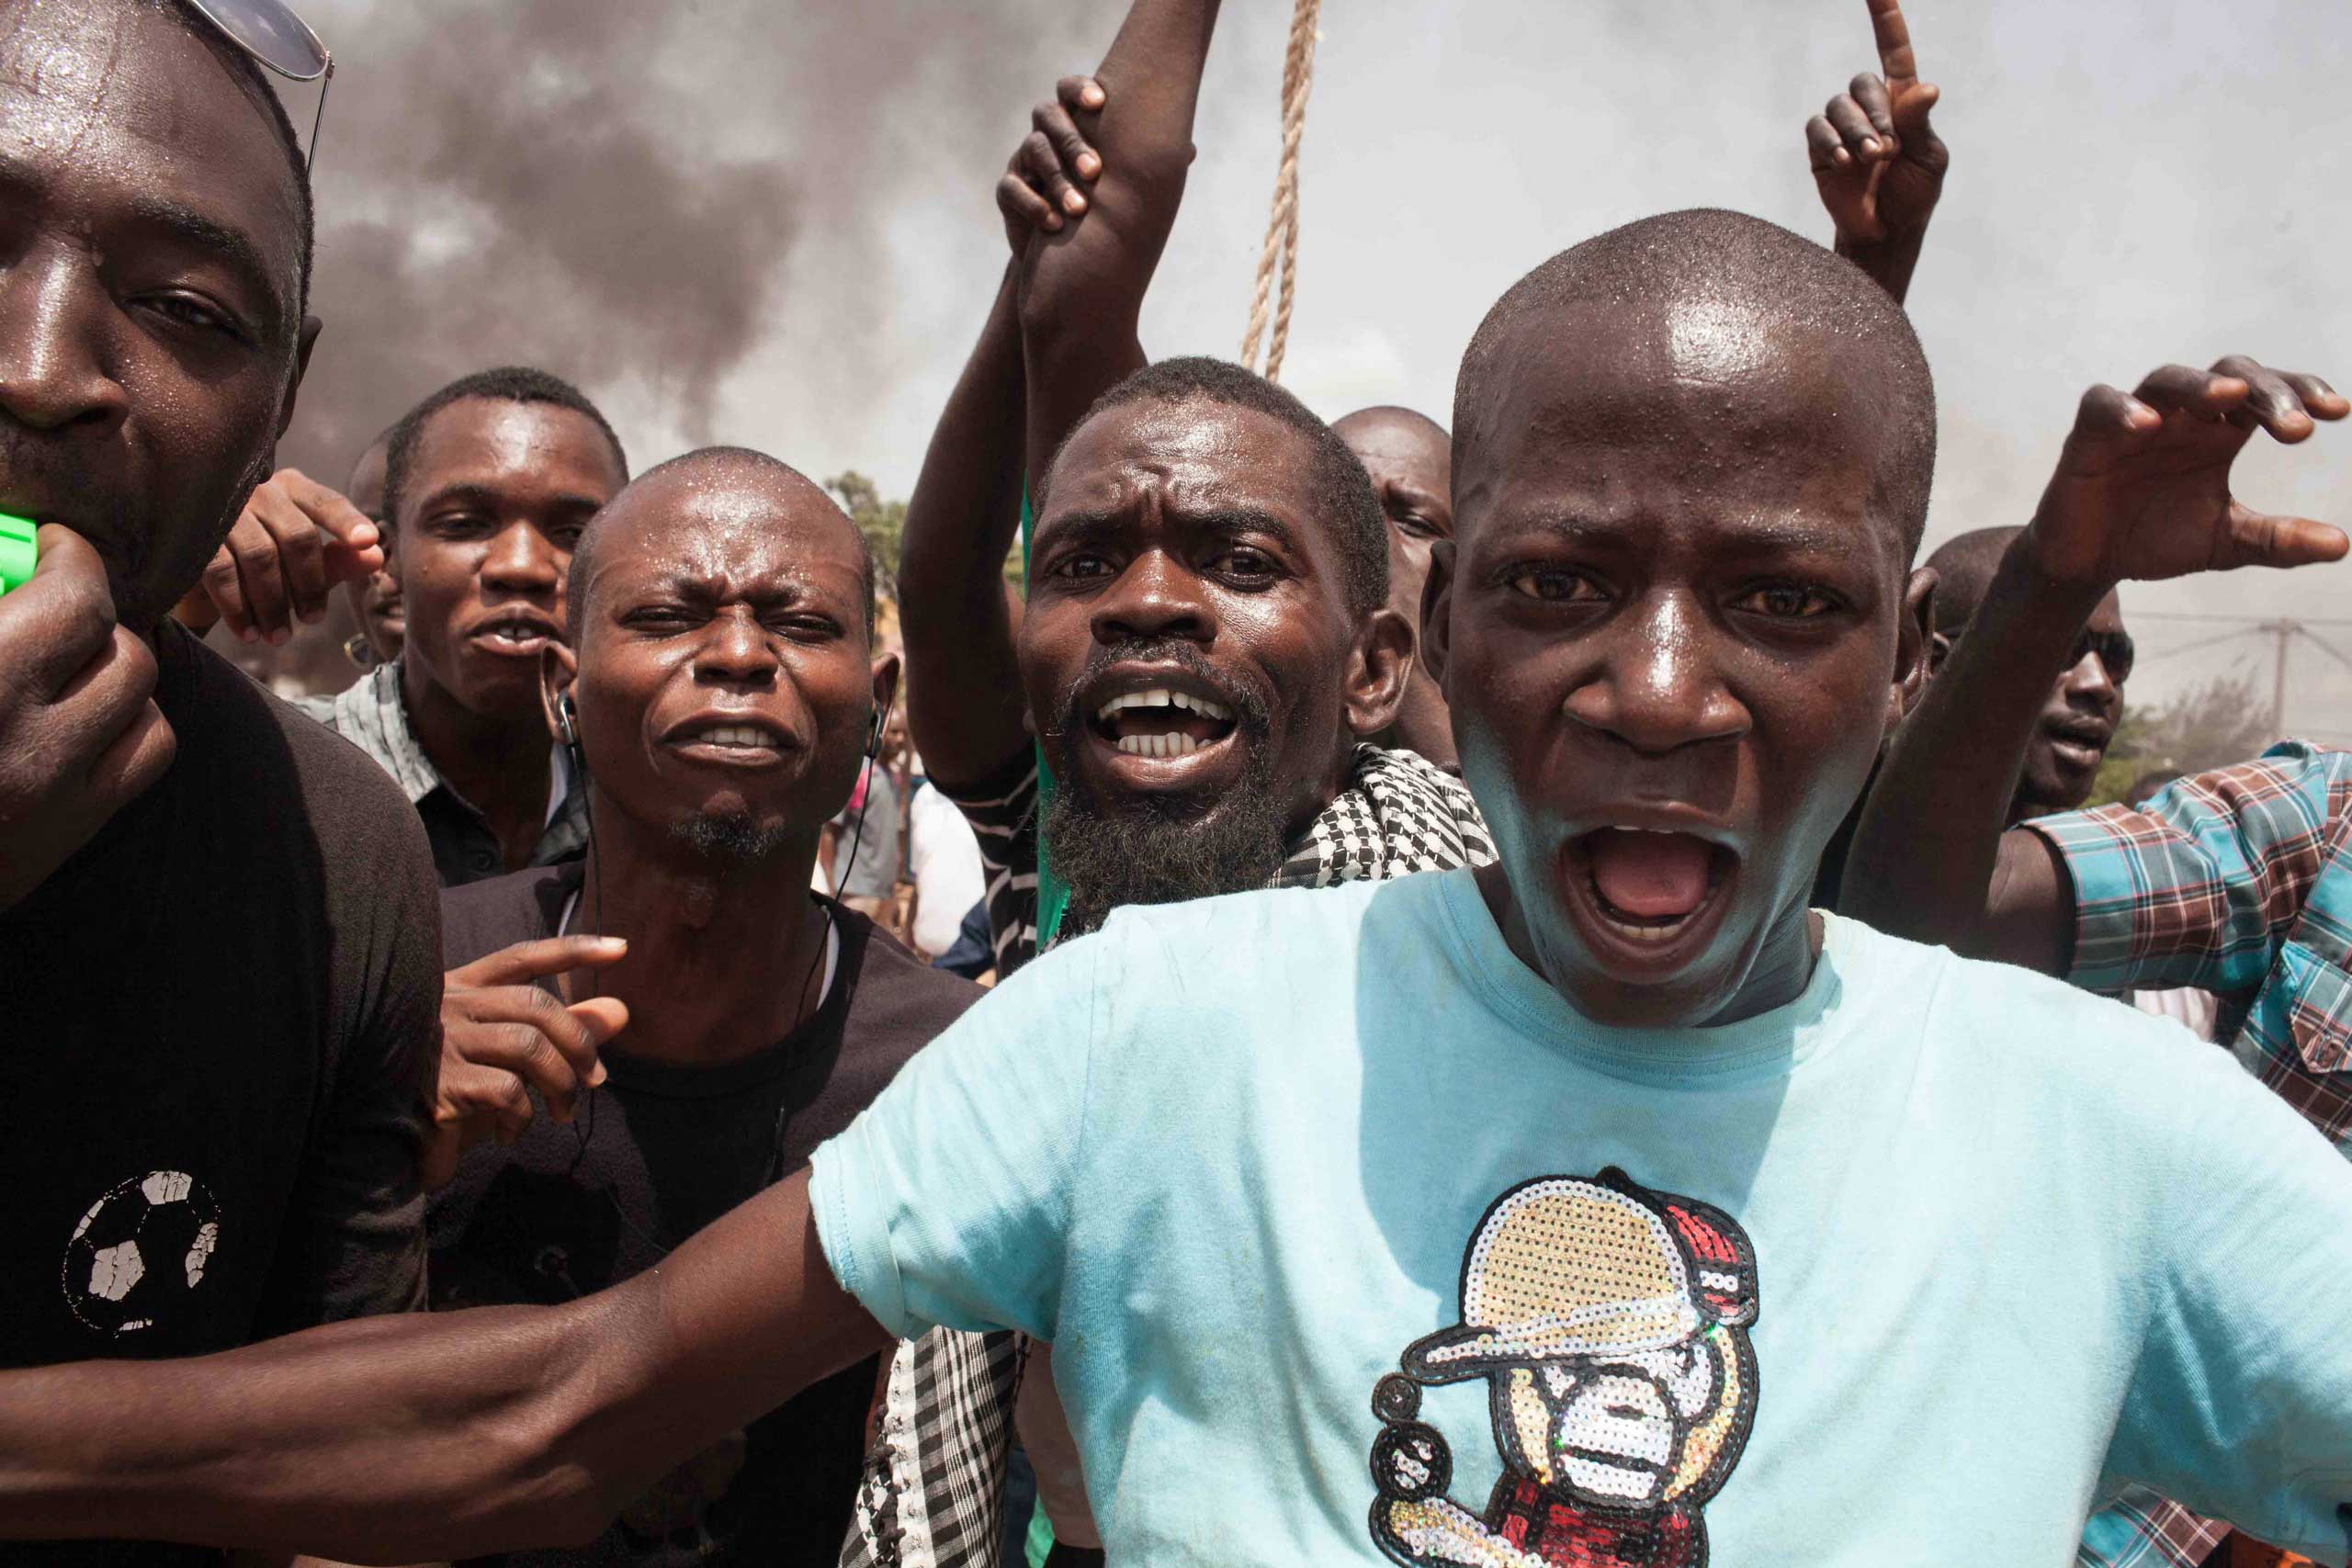 Burkina Faso protestors shout out as they take to the streets in the city of Ouagadougou, Burkina Faso, on Sept. 17, 2015. (Theo Renaut—AP)